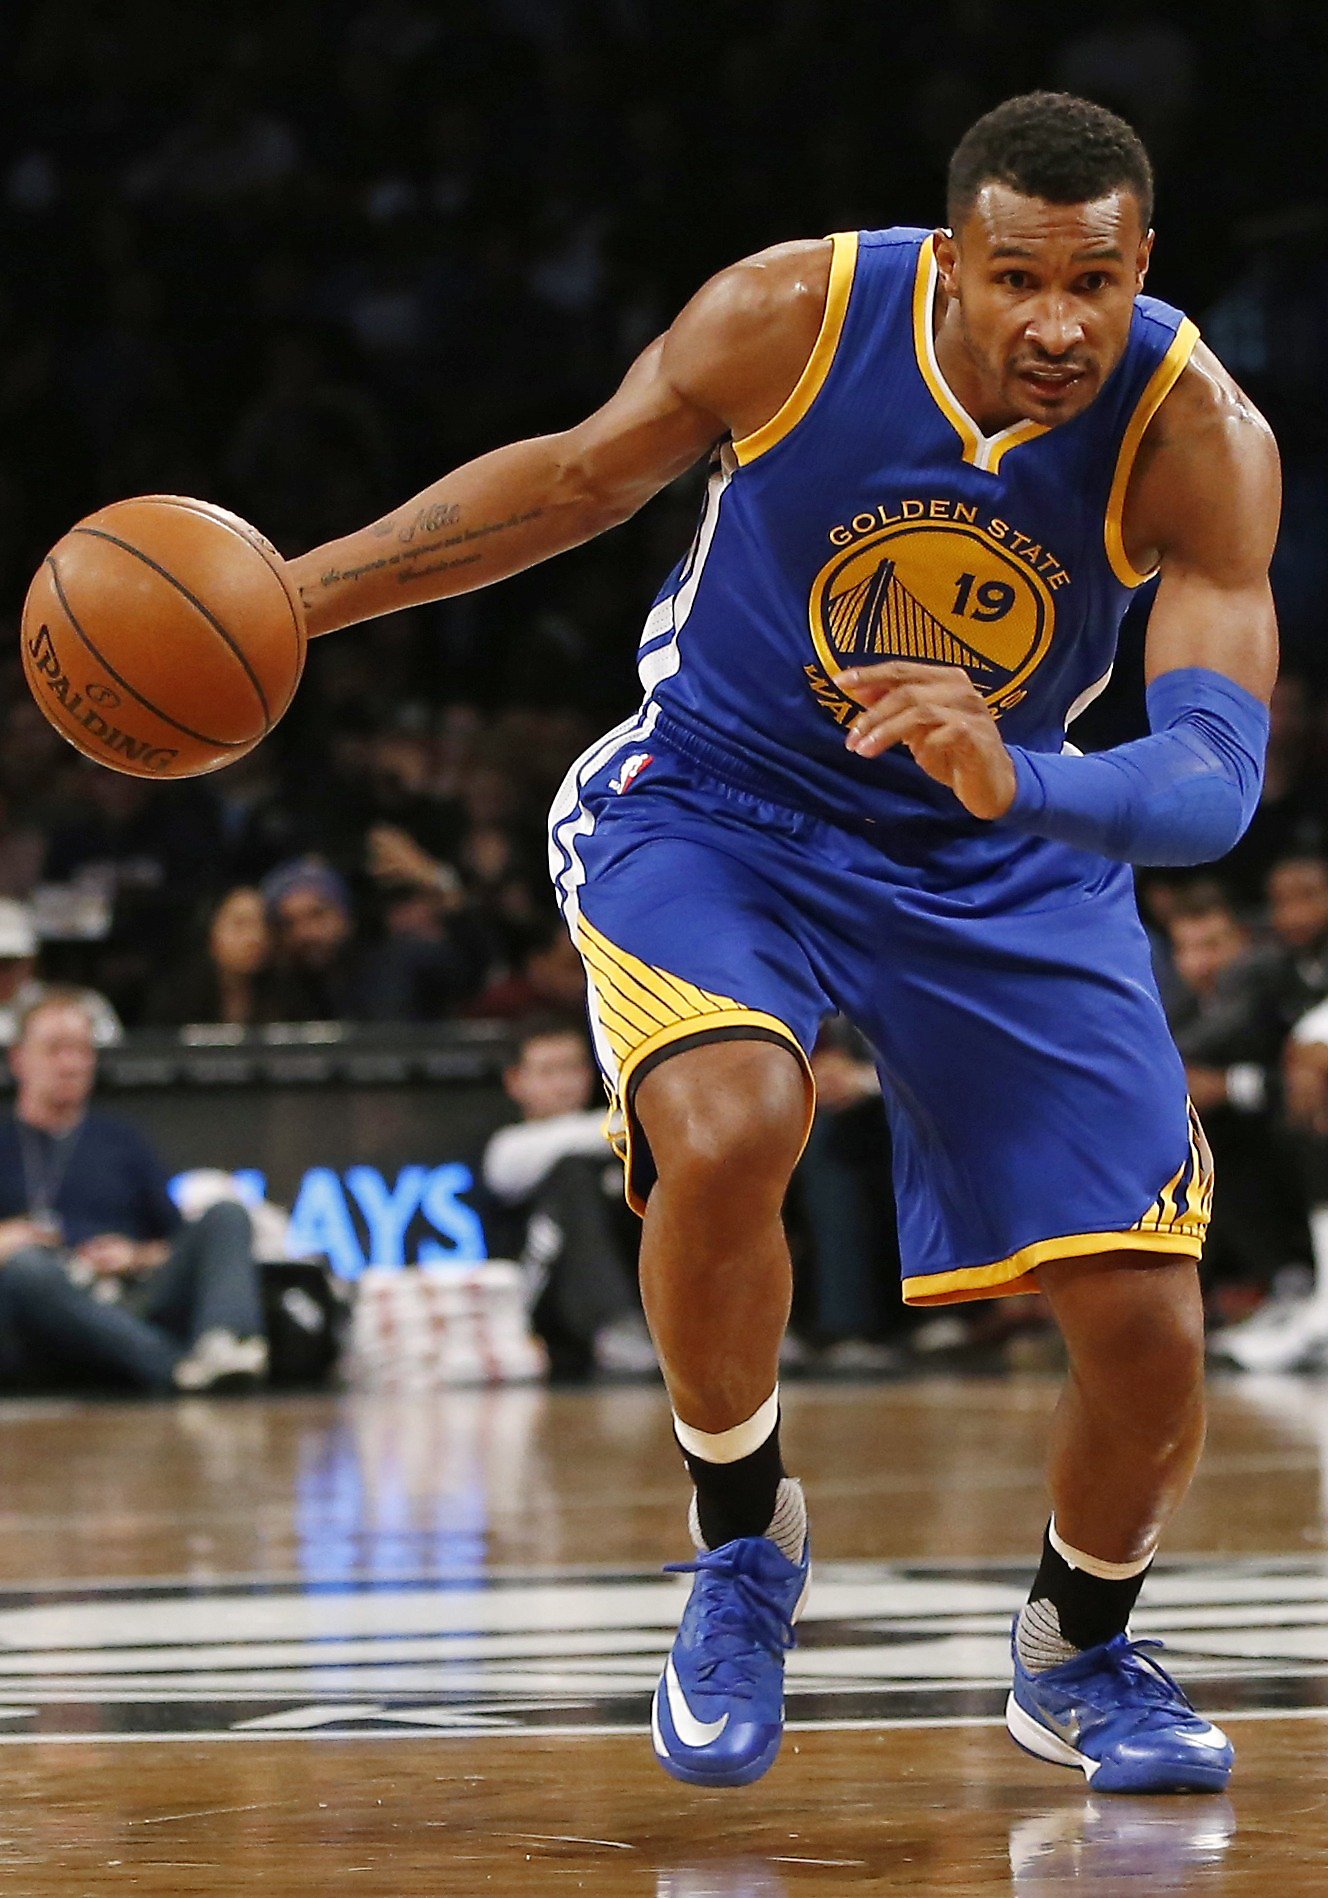 Warriors sign guard Leandro Barbosa - Sports Illustrated